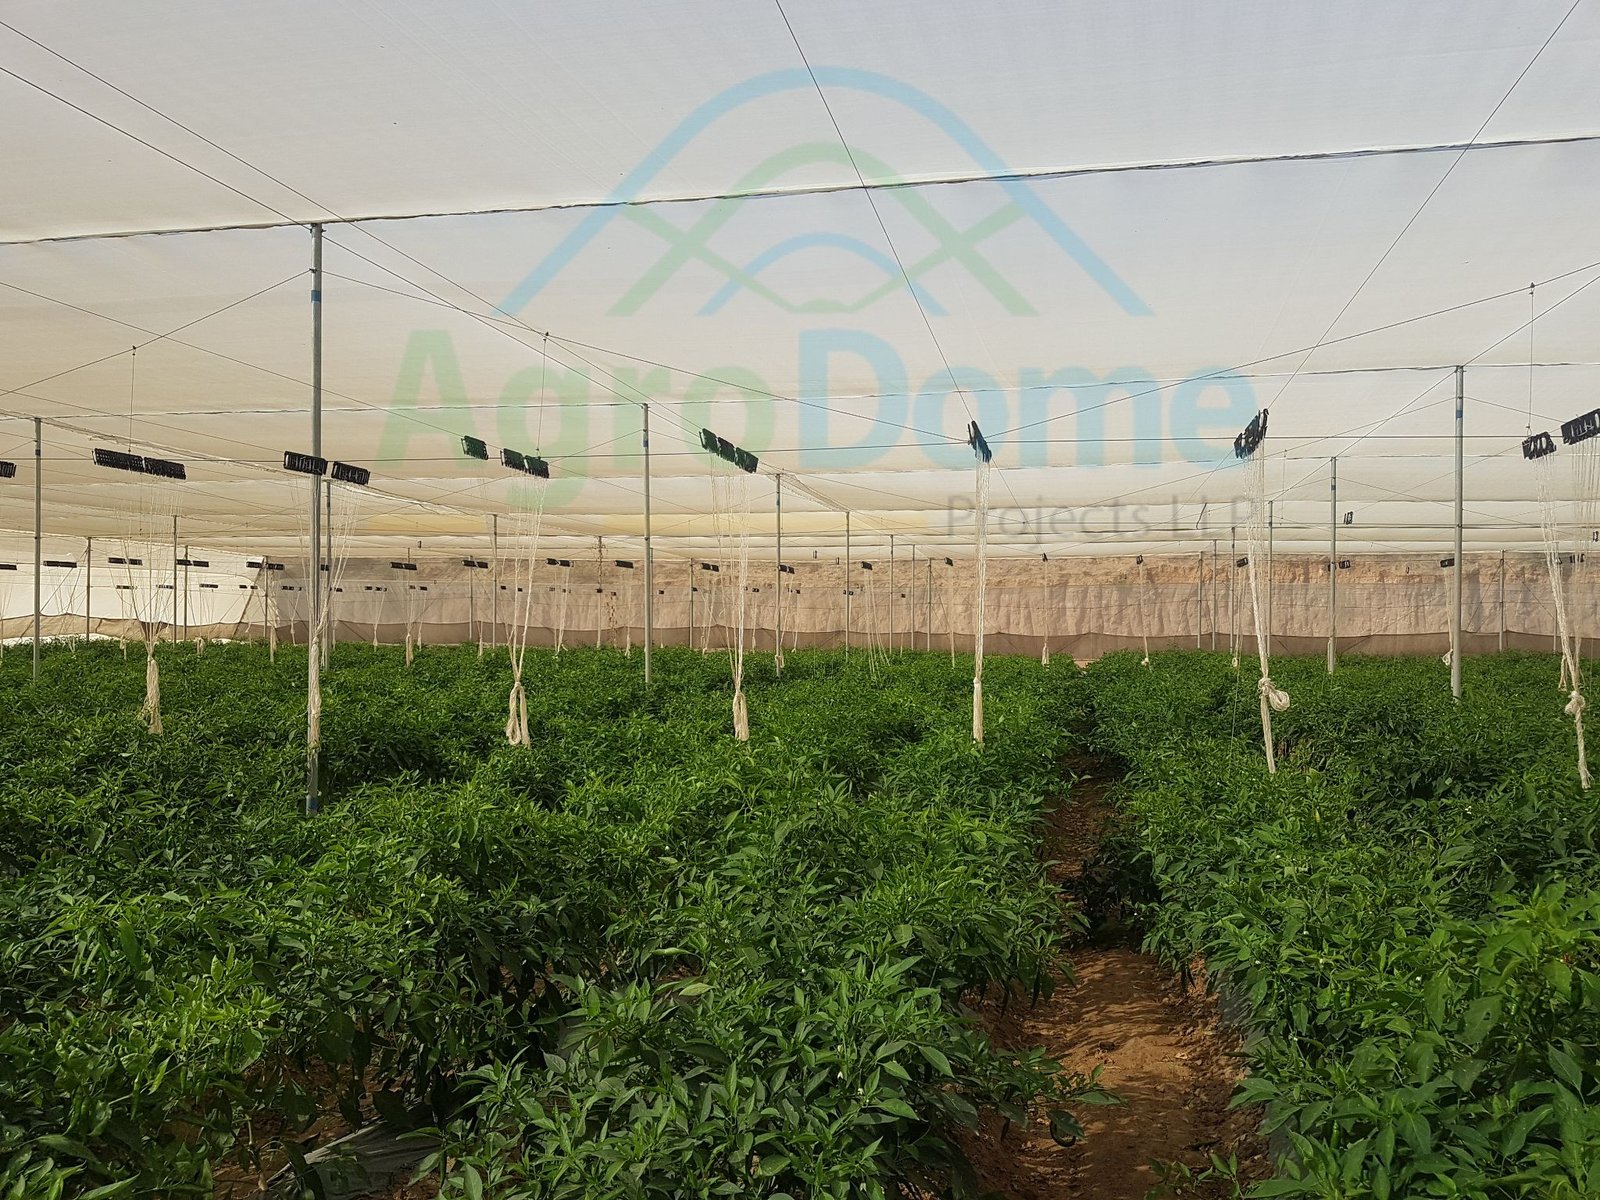 Why Trellising support systems is necessary in agriculture greenhouse or polyhouse structures?